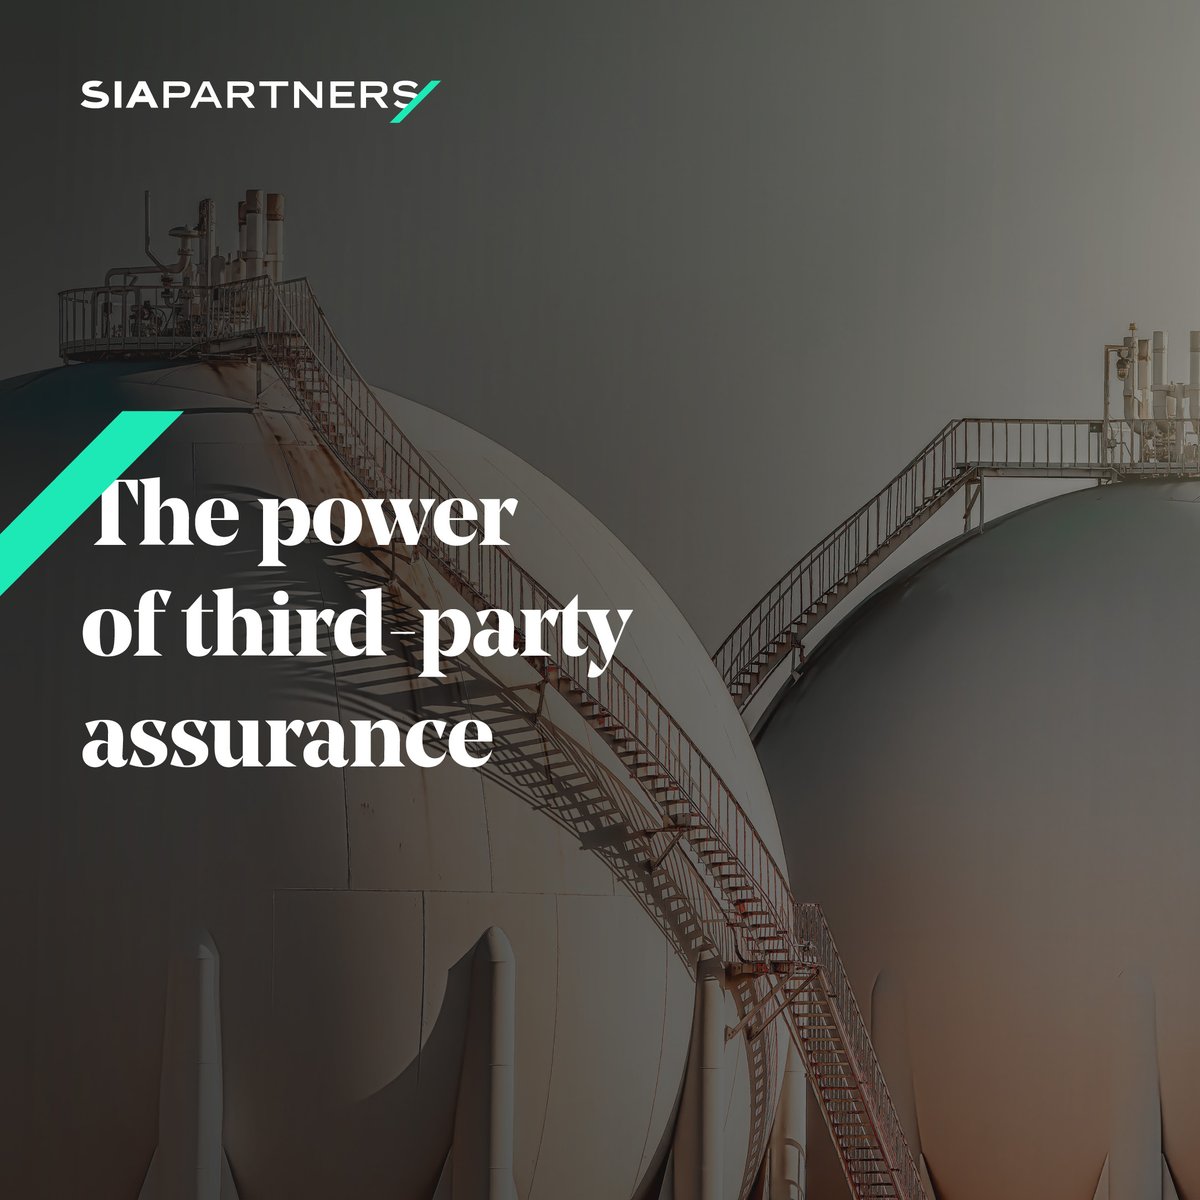 Majority of companies from our benchmark utilized third-party assurance for their reported metrics, indicating a growing recognition of its impact on market credibility. Read more: hubs.ly/Q02rFkM50

#ESG #EnergySector  #CorporateResponsibility  #SiaPartners